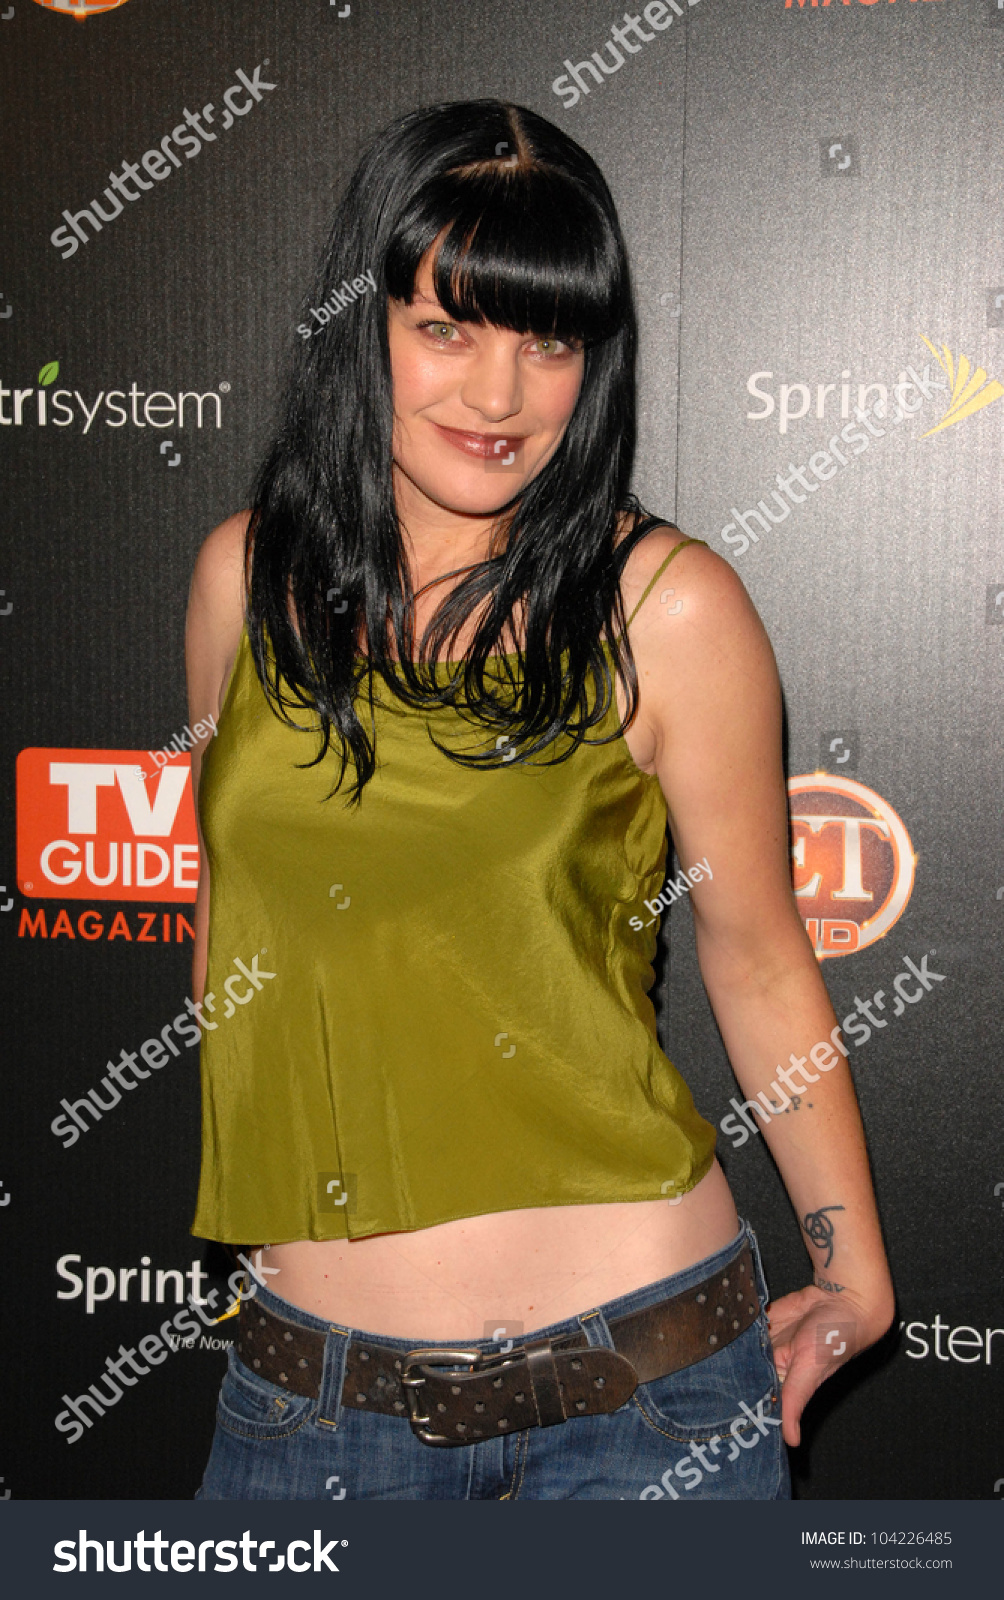 becca craft recommends pauley perrette sexy photos pic